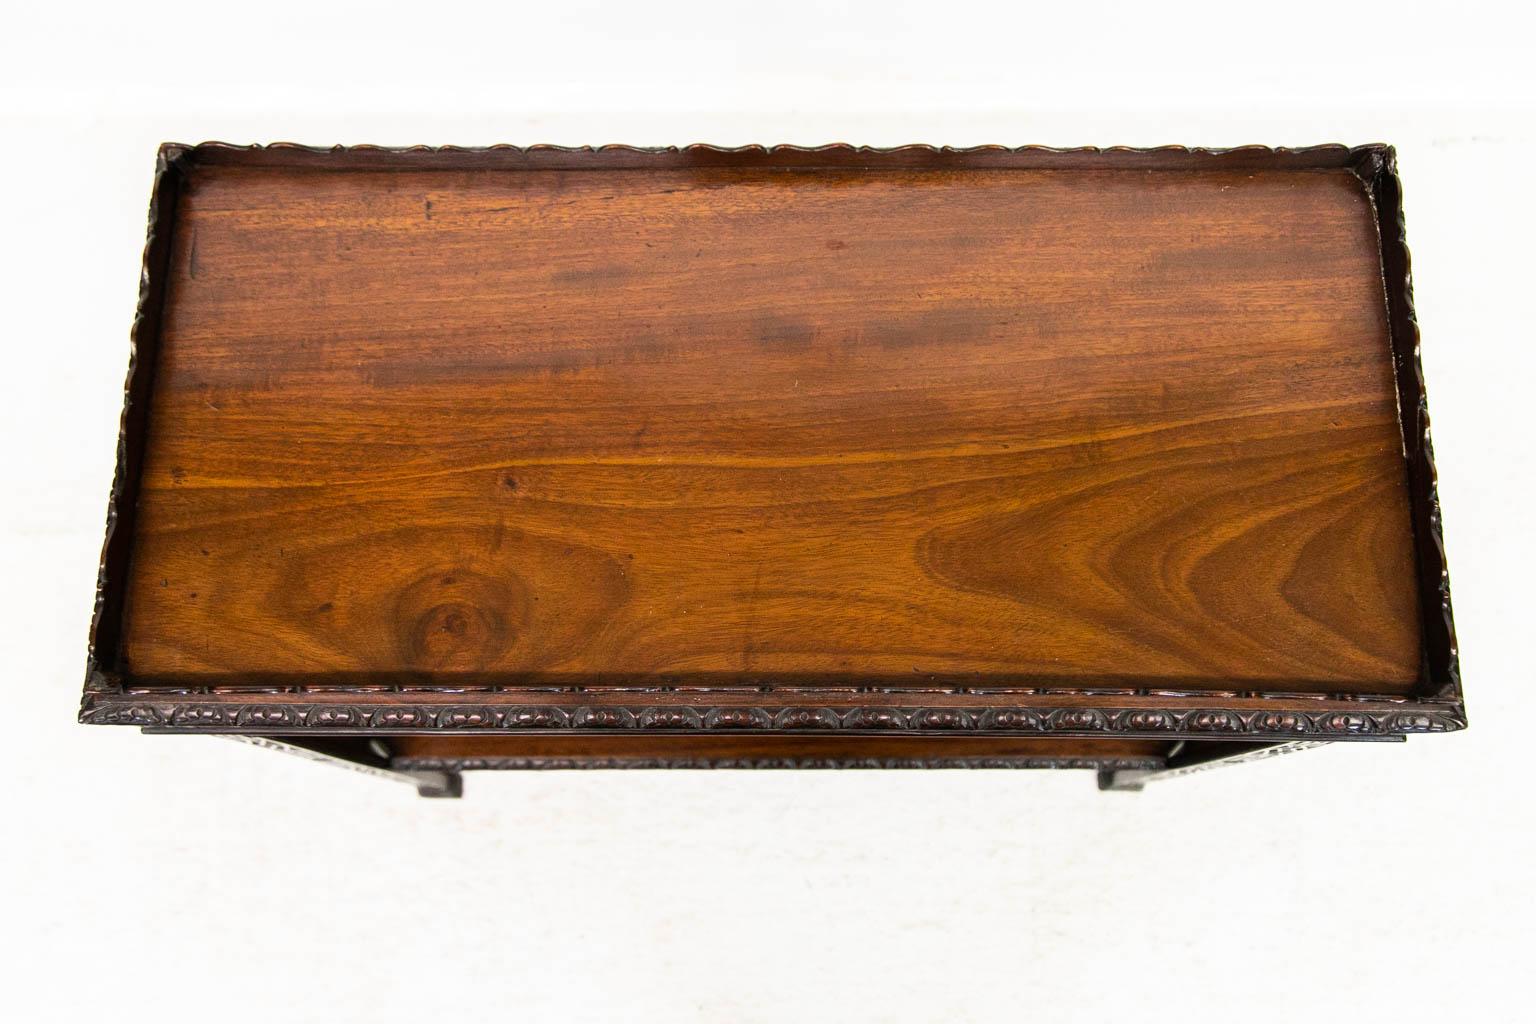 The top of this mahogany tea table has a scalloped gallery. The top edge has gadrooned carvings. The upper apron and legs are carved with blind fretwork. The lower shelf apron has carved floral arabesques. The inside of the legs are chamfered. One